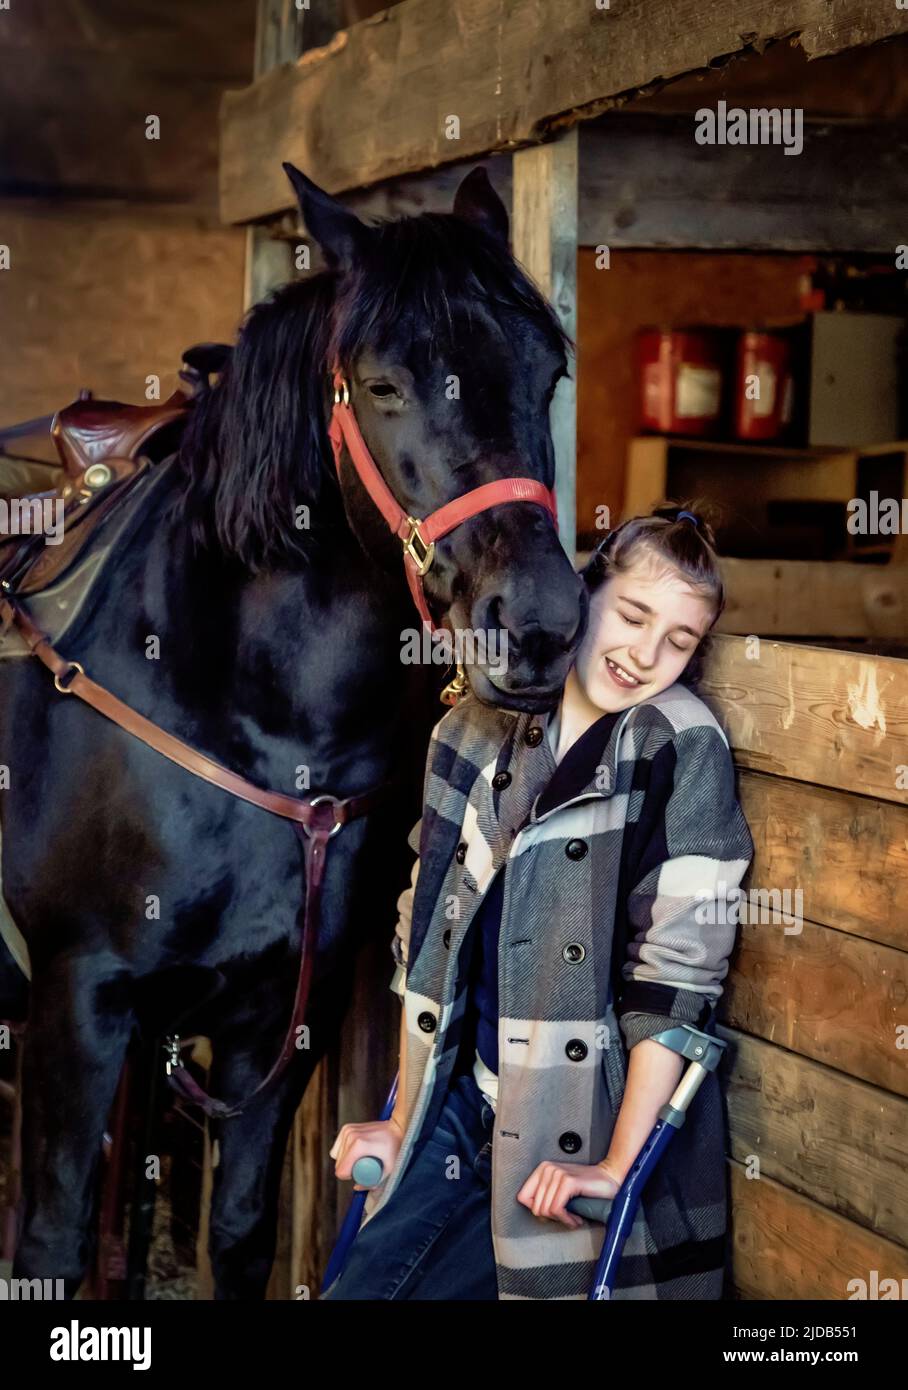 A young girl with Cerebral Palsy with a horse in a barn during a Hippotherapy session; Westlock, Alberta, Canada Stock Photo